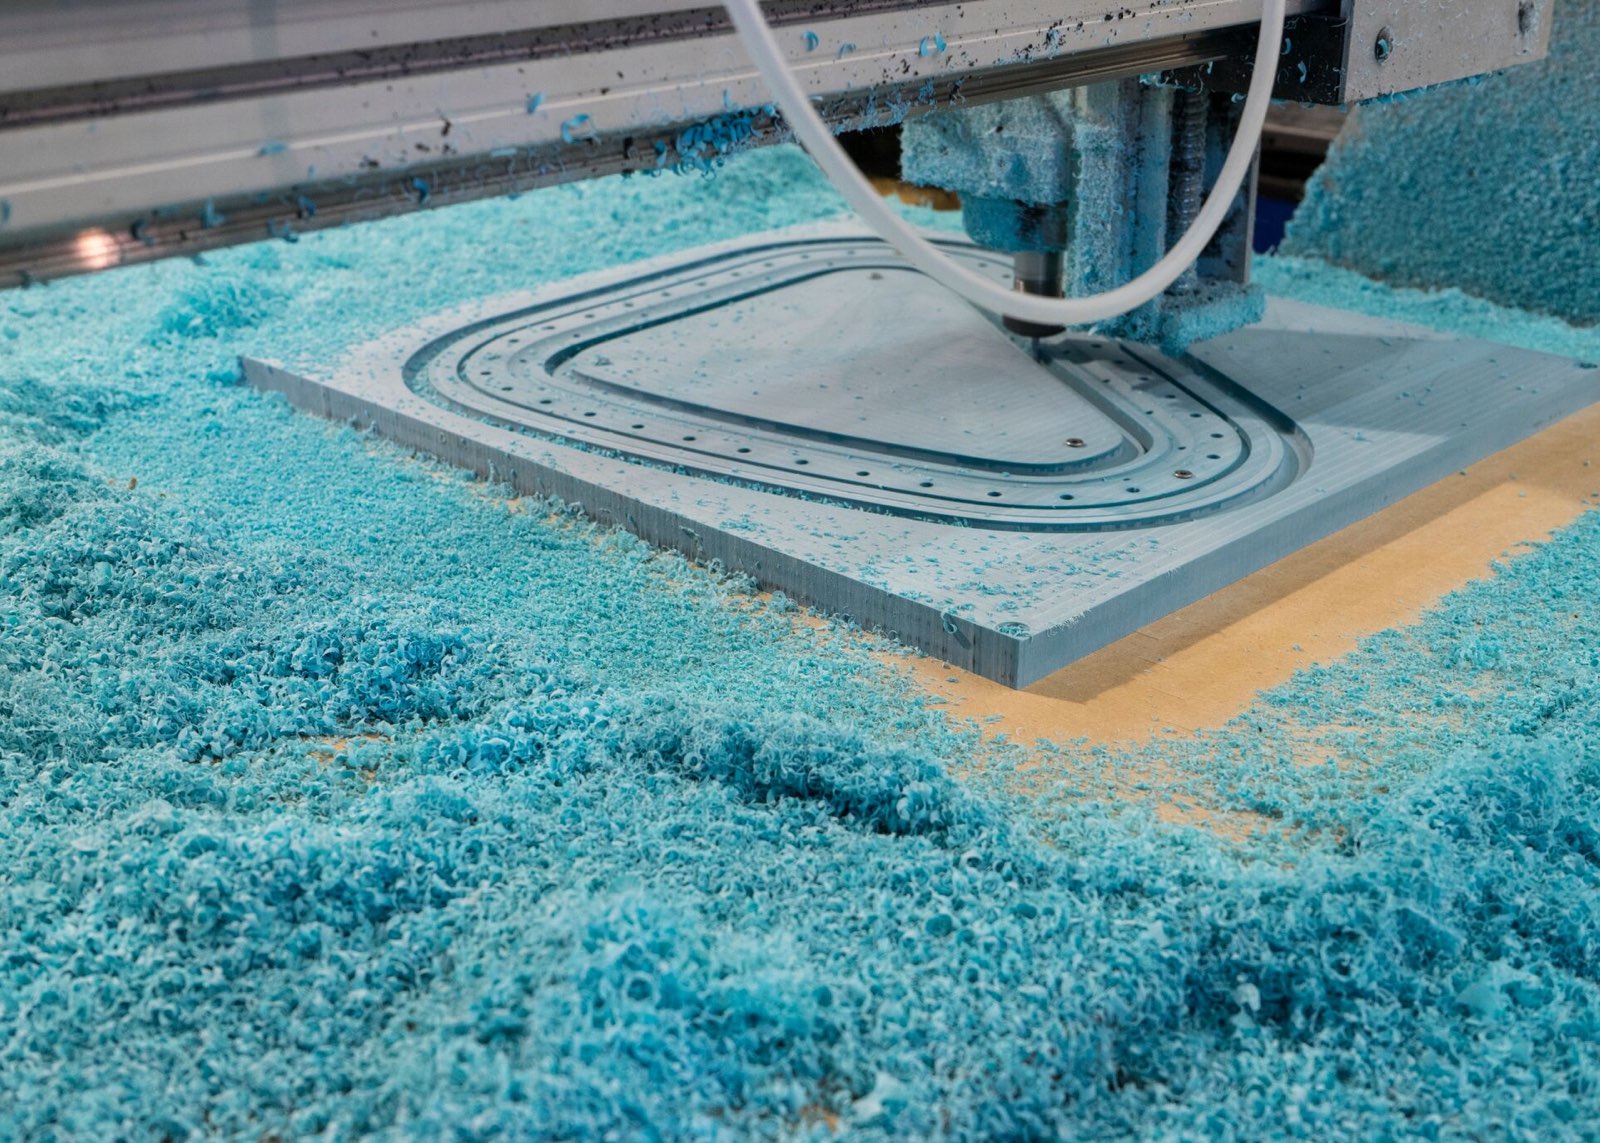 A CNC machine cuts out a component for a prototype of the Cosm Chair.